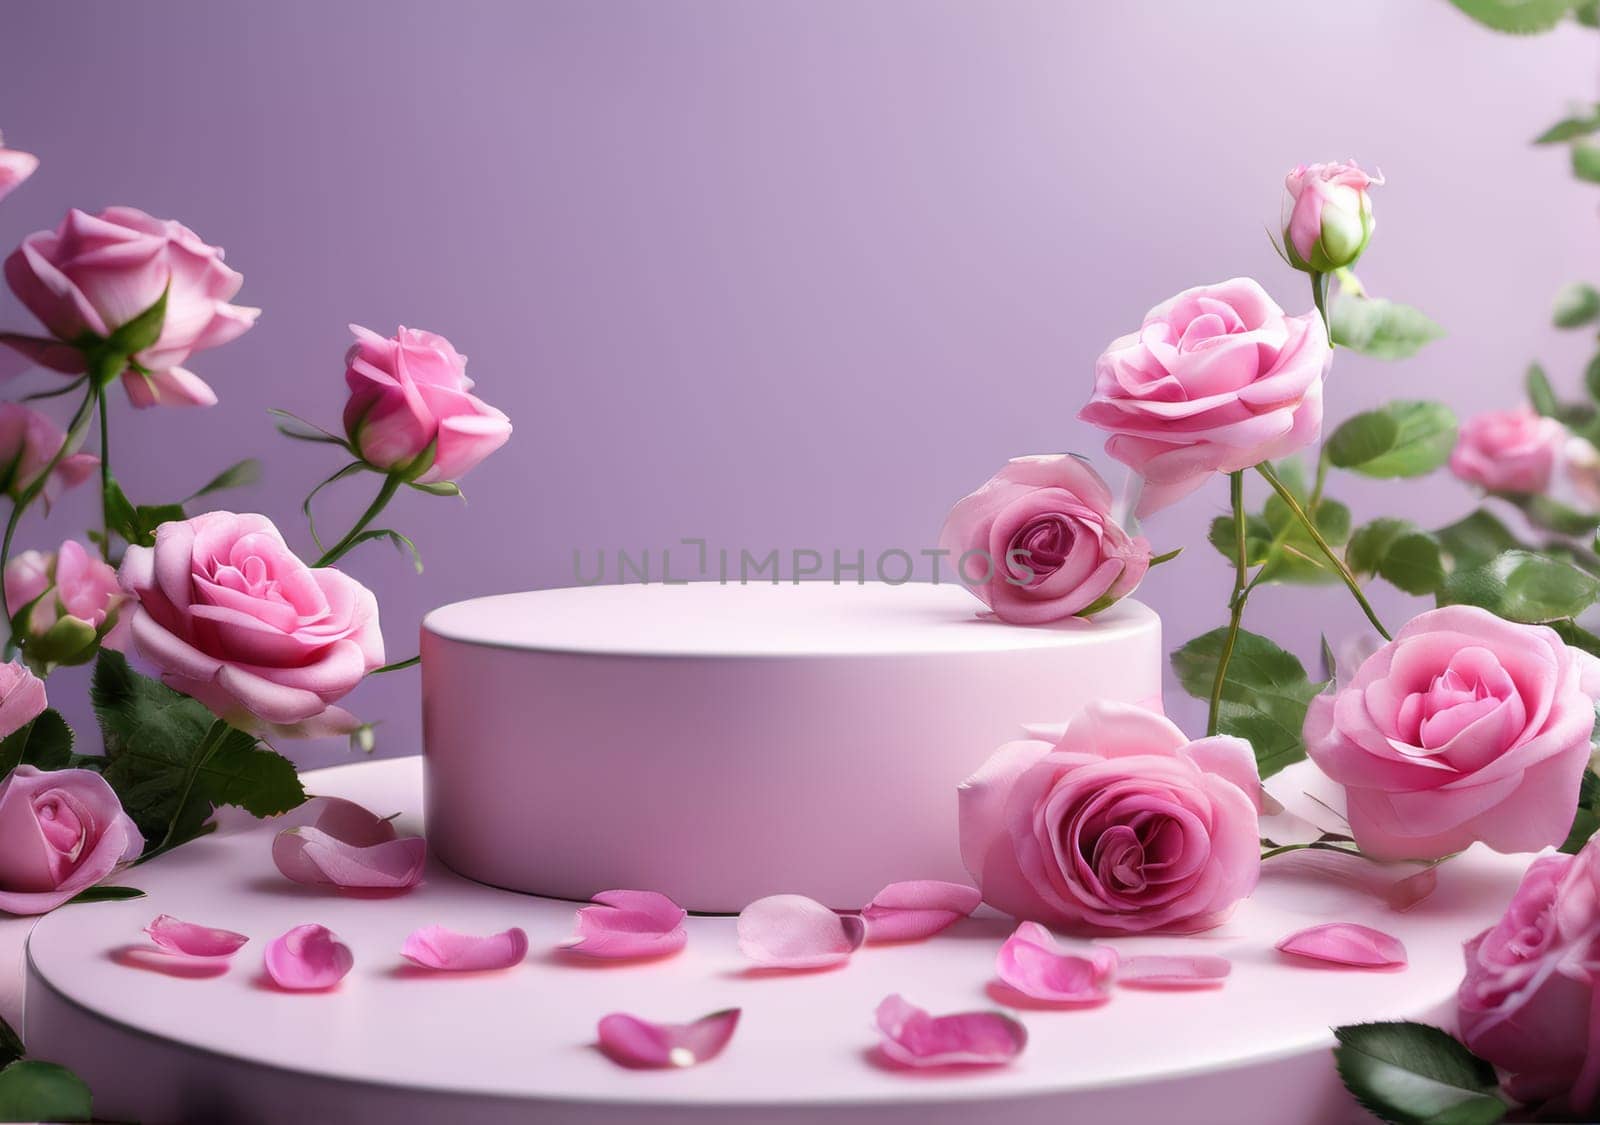 Podium adorned with pink rose petals and flowers by fascinadora